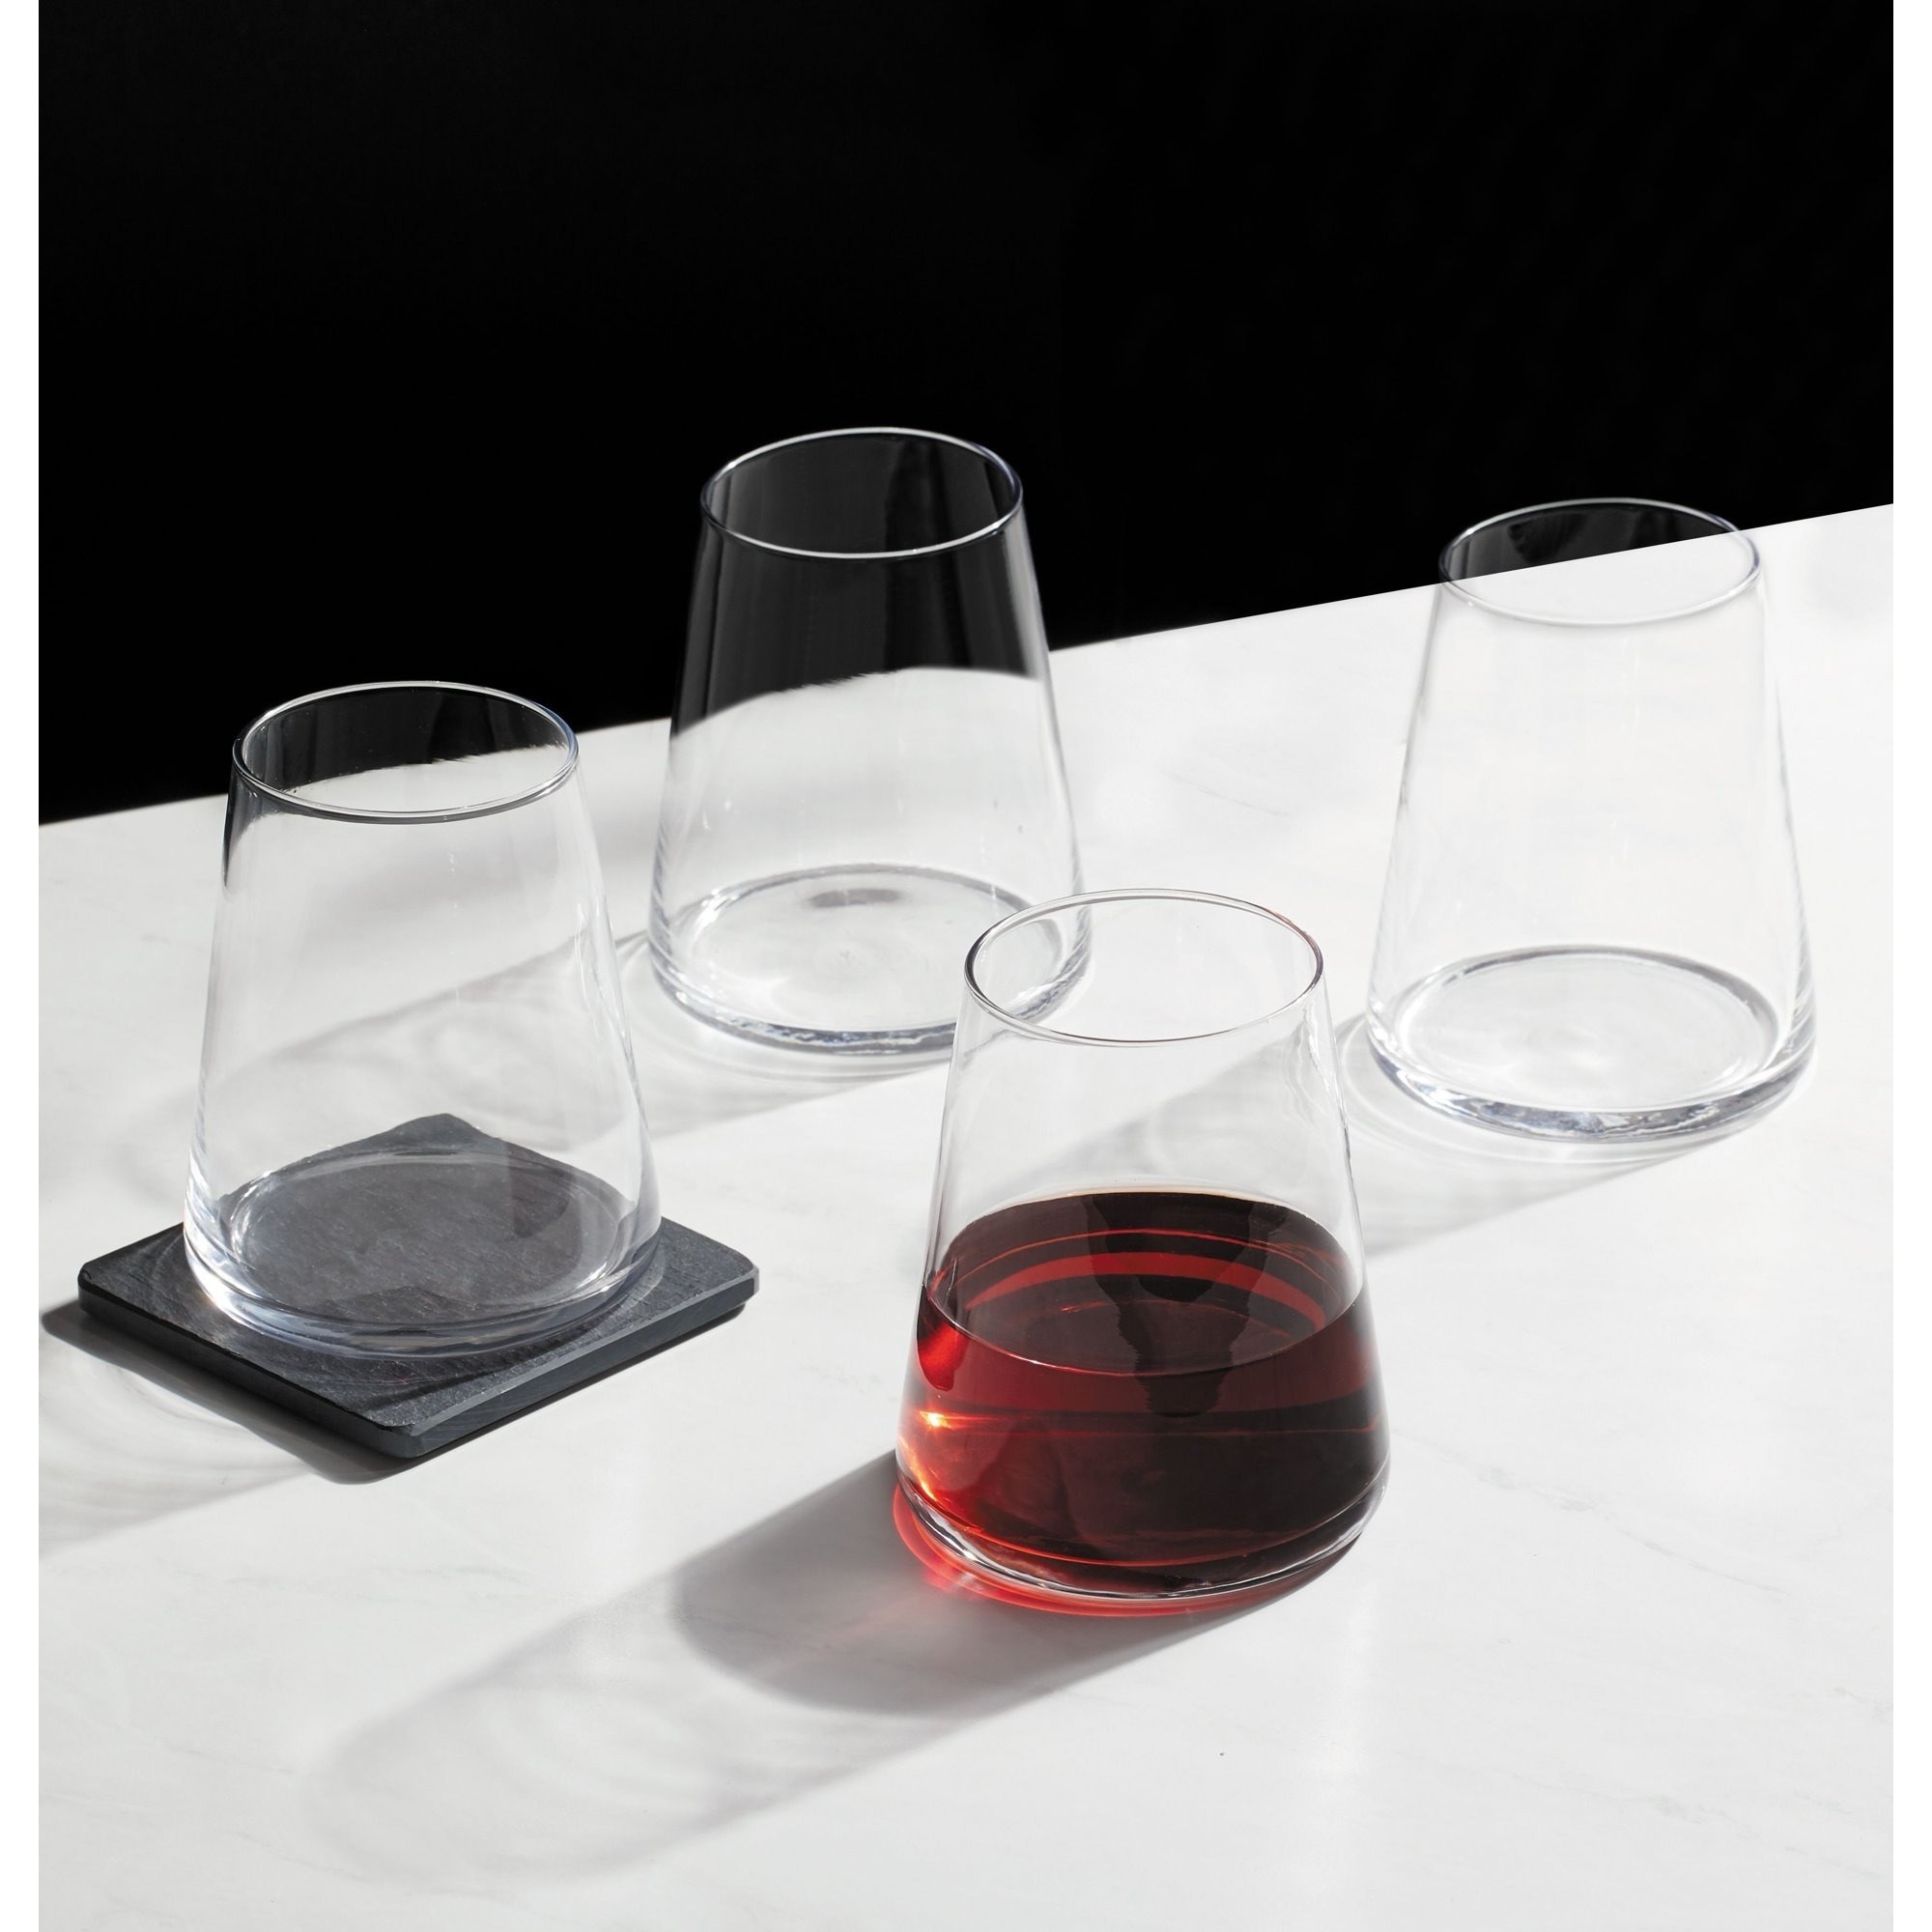 The set of stemless wine glasses on a counter